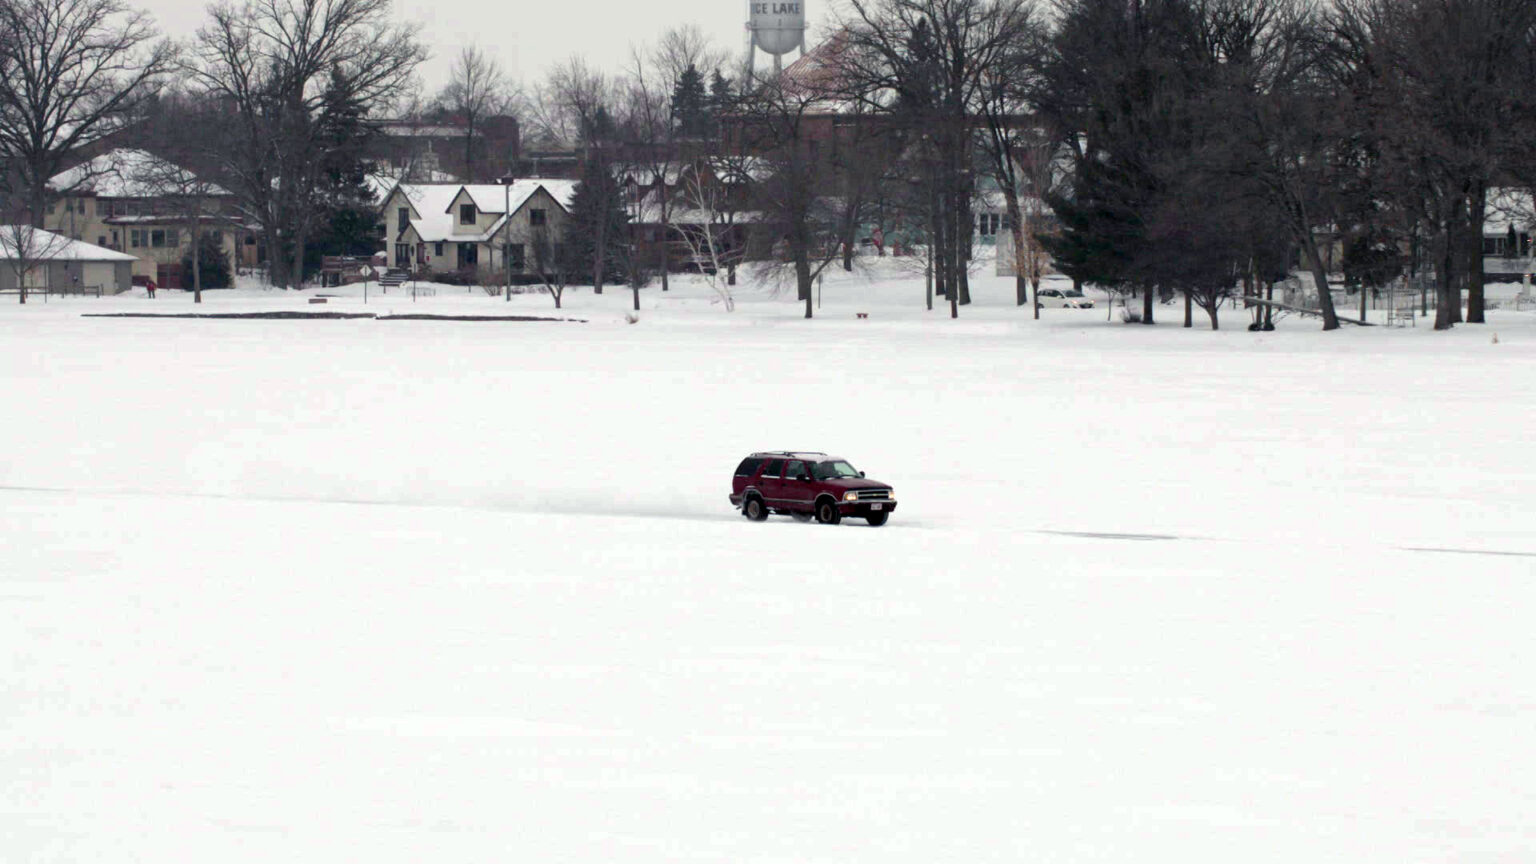 An SUV drives on an ice road on a lake with trees and buildings on the shore in the background.